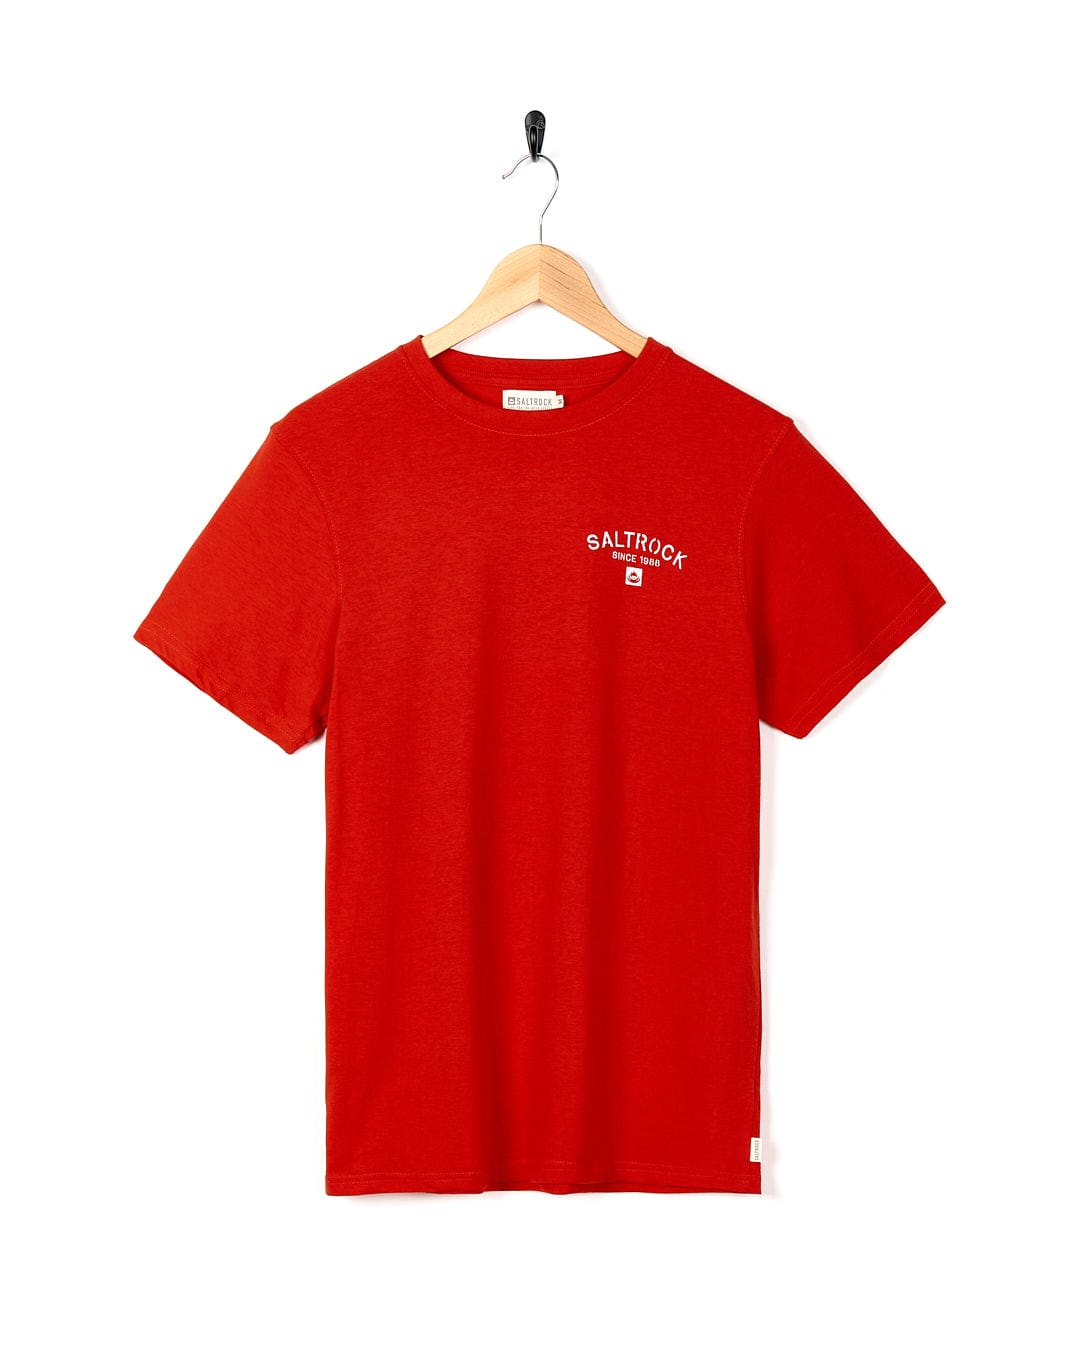 A Saltrock Stencil - Mens St Ives Location T-Shirt - Red with a white logo on it.